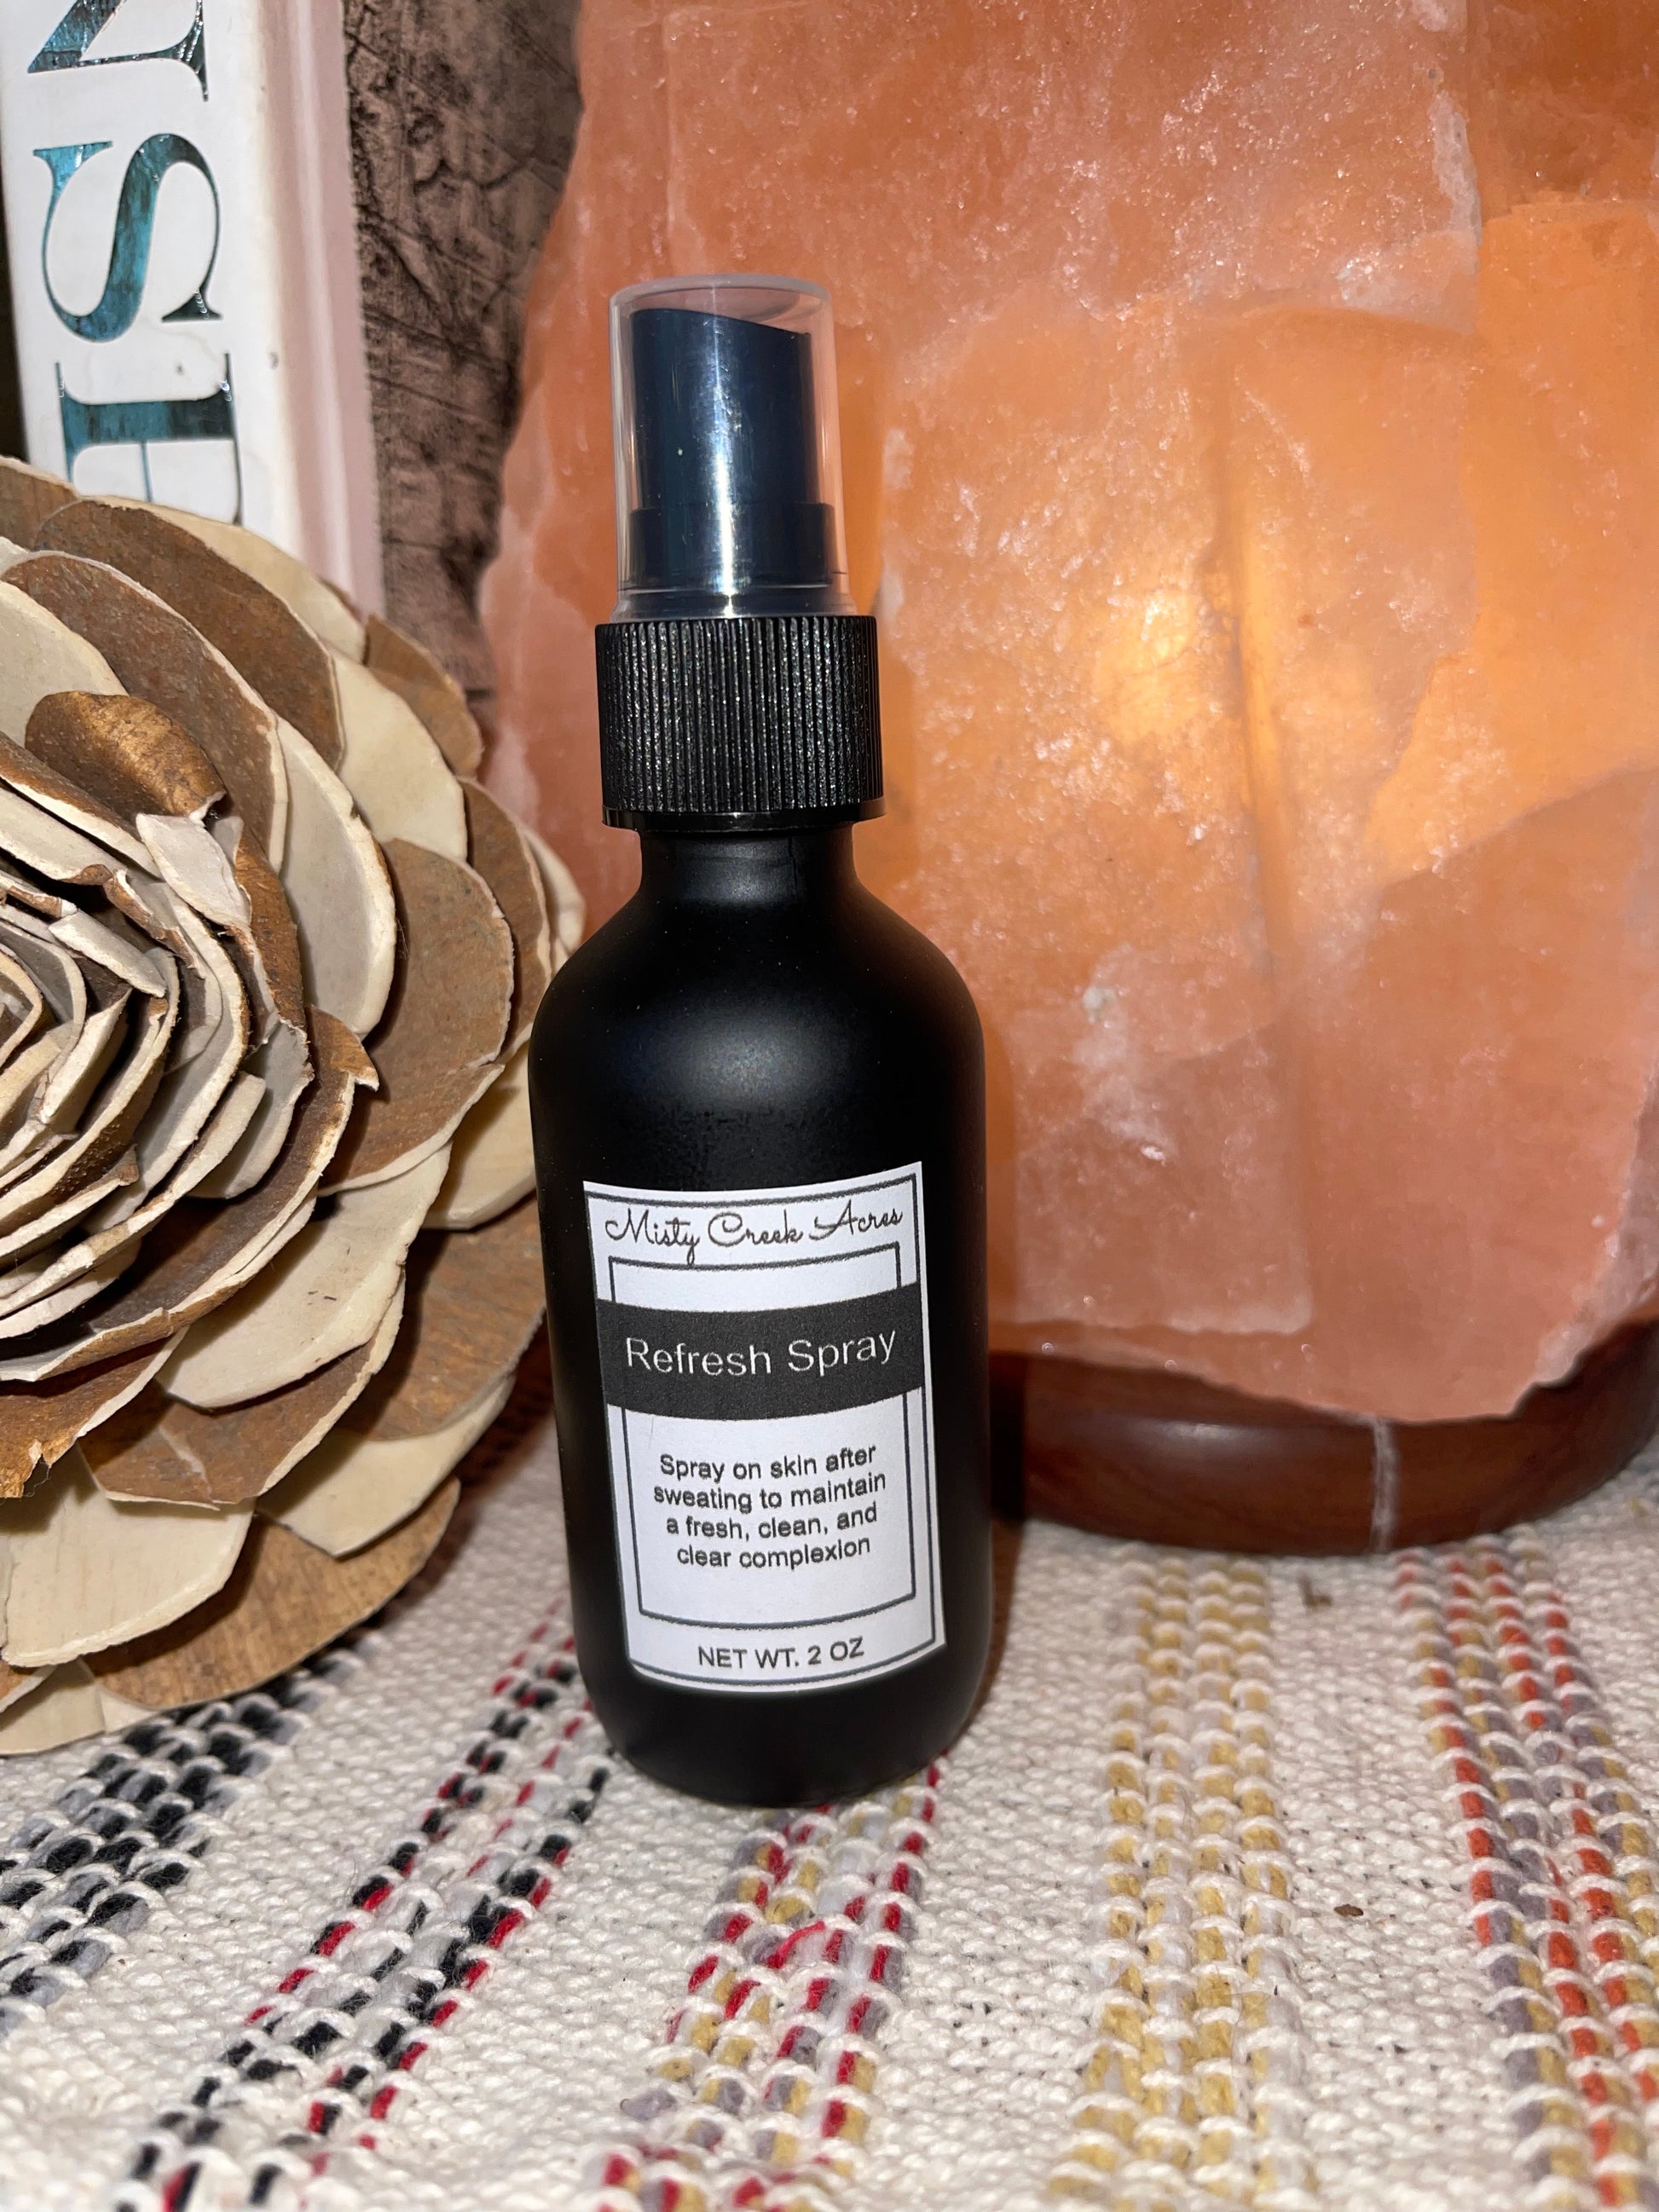 Natural refresh spray, natural spray for blemish control, natural acne remedy, redness reducer, redness reducing spray, acne toner, toner to prevent breakouts, non toxic acne remedy, organic witch hazel spray, acne remedy with clean ingredients, small business self care products, non toxic self care, holistic remedy for acne, holistic medicine kit